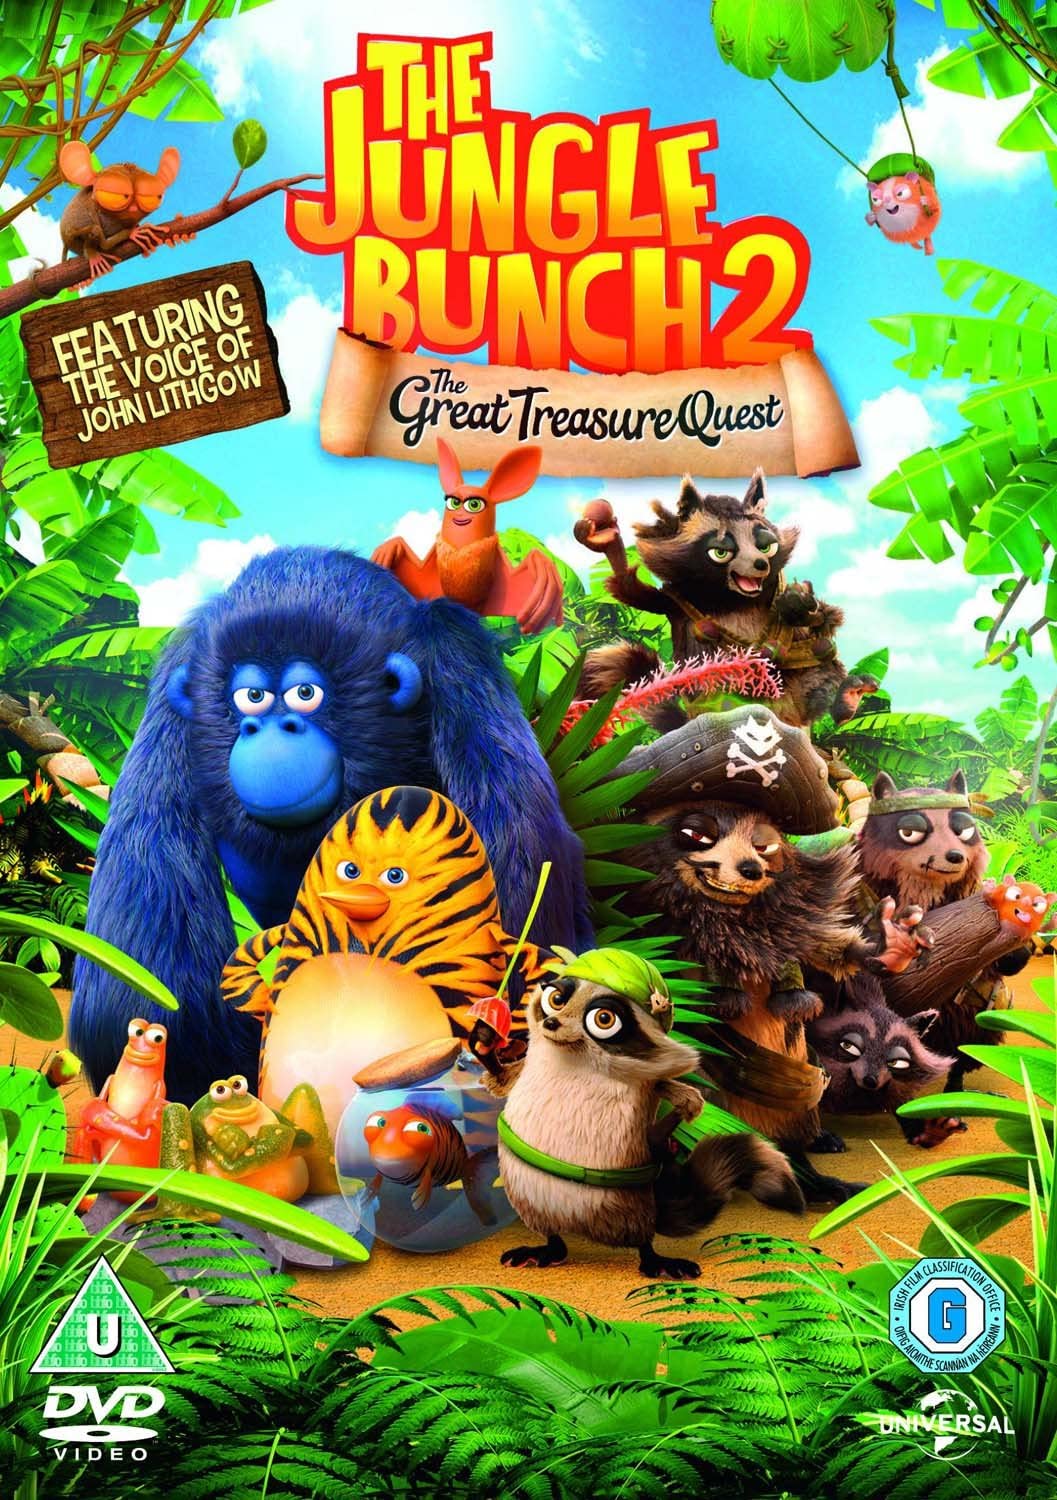 The Jungle Bunch 2: The Great Treasure Quest (DVD)